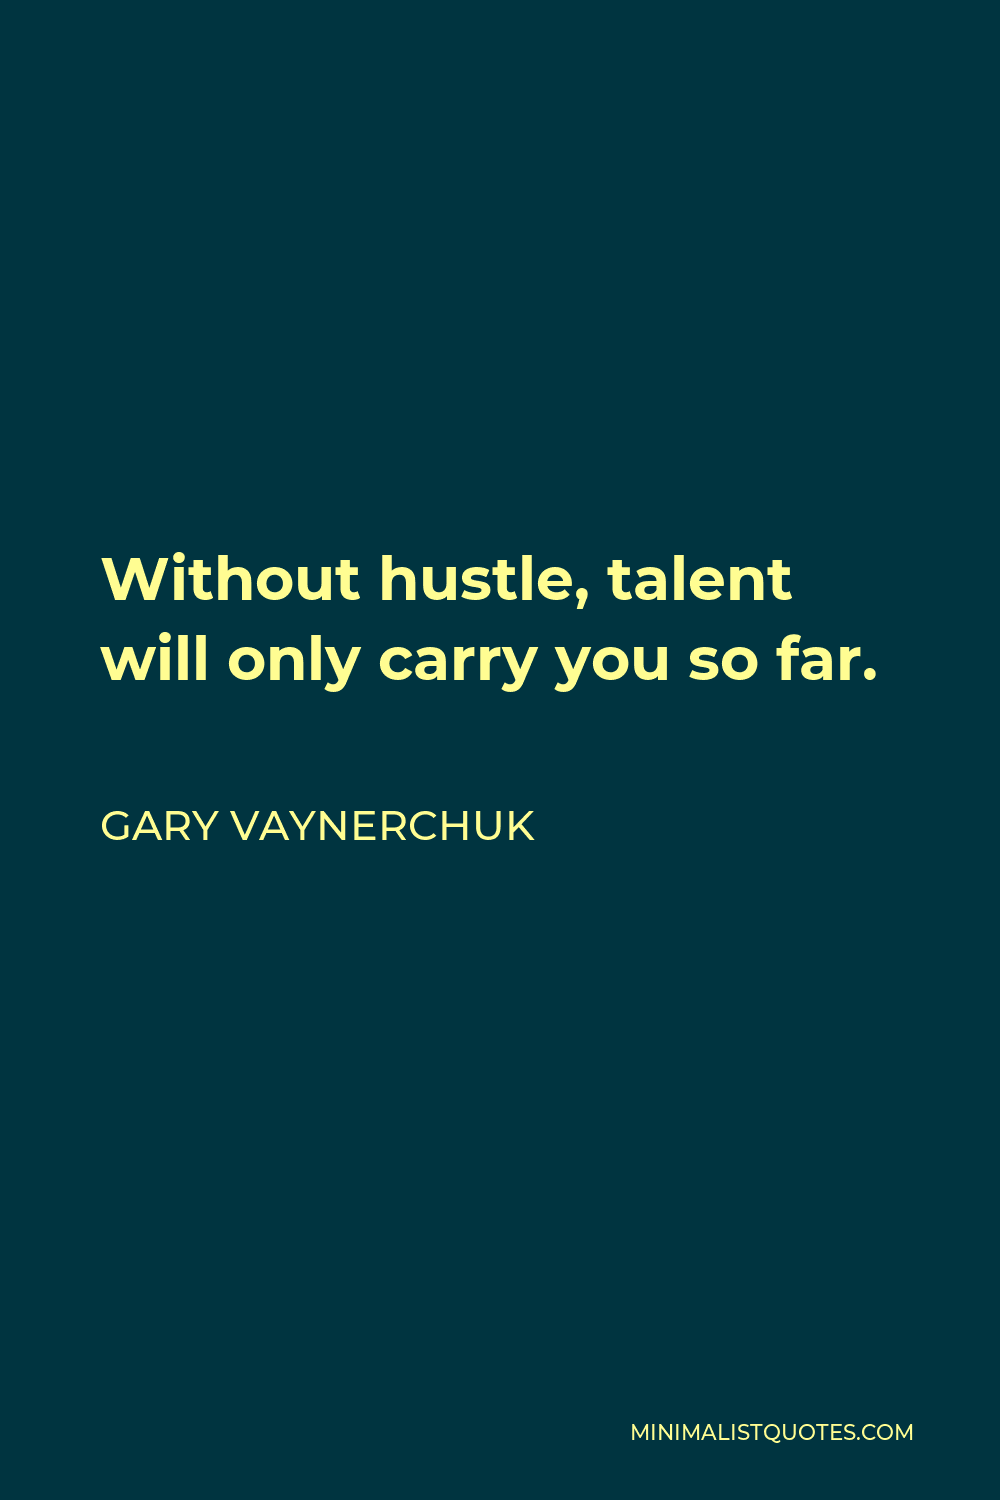 Gary Vaynerchuk Quote - Without hustle, talent will only carry you so far.